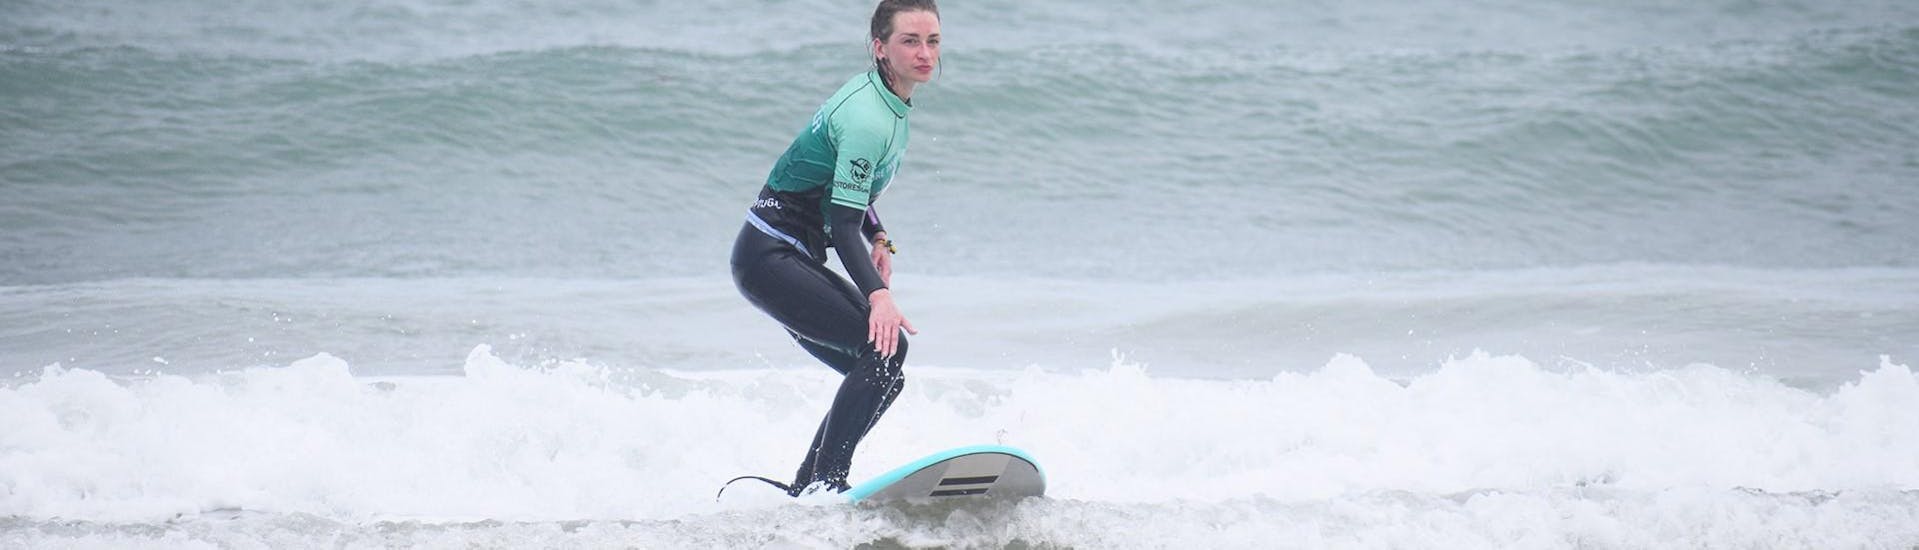 A woman coached during a private lesson by G3 Store rised on her board in a Peniche wave.